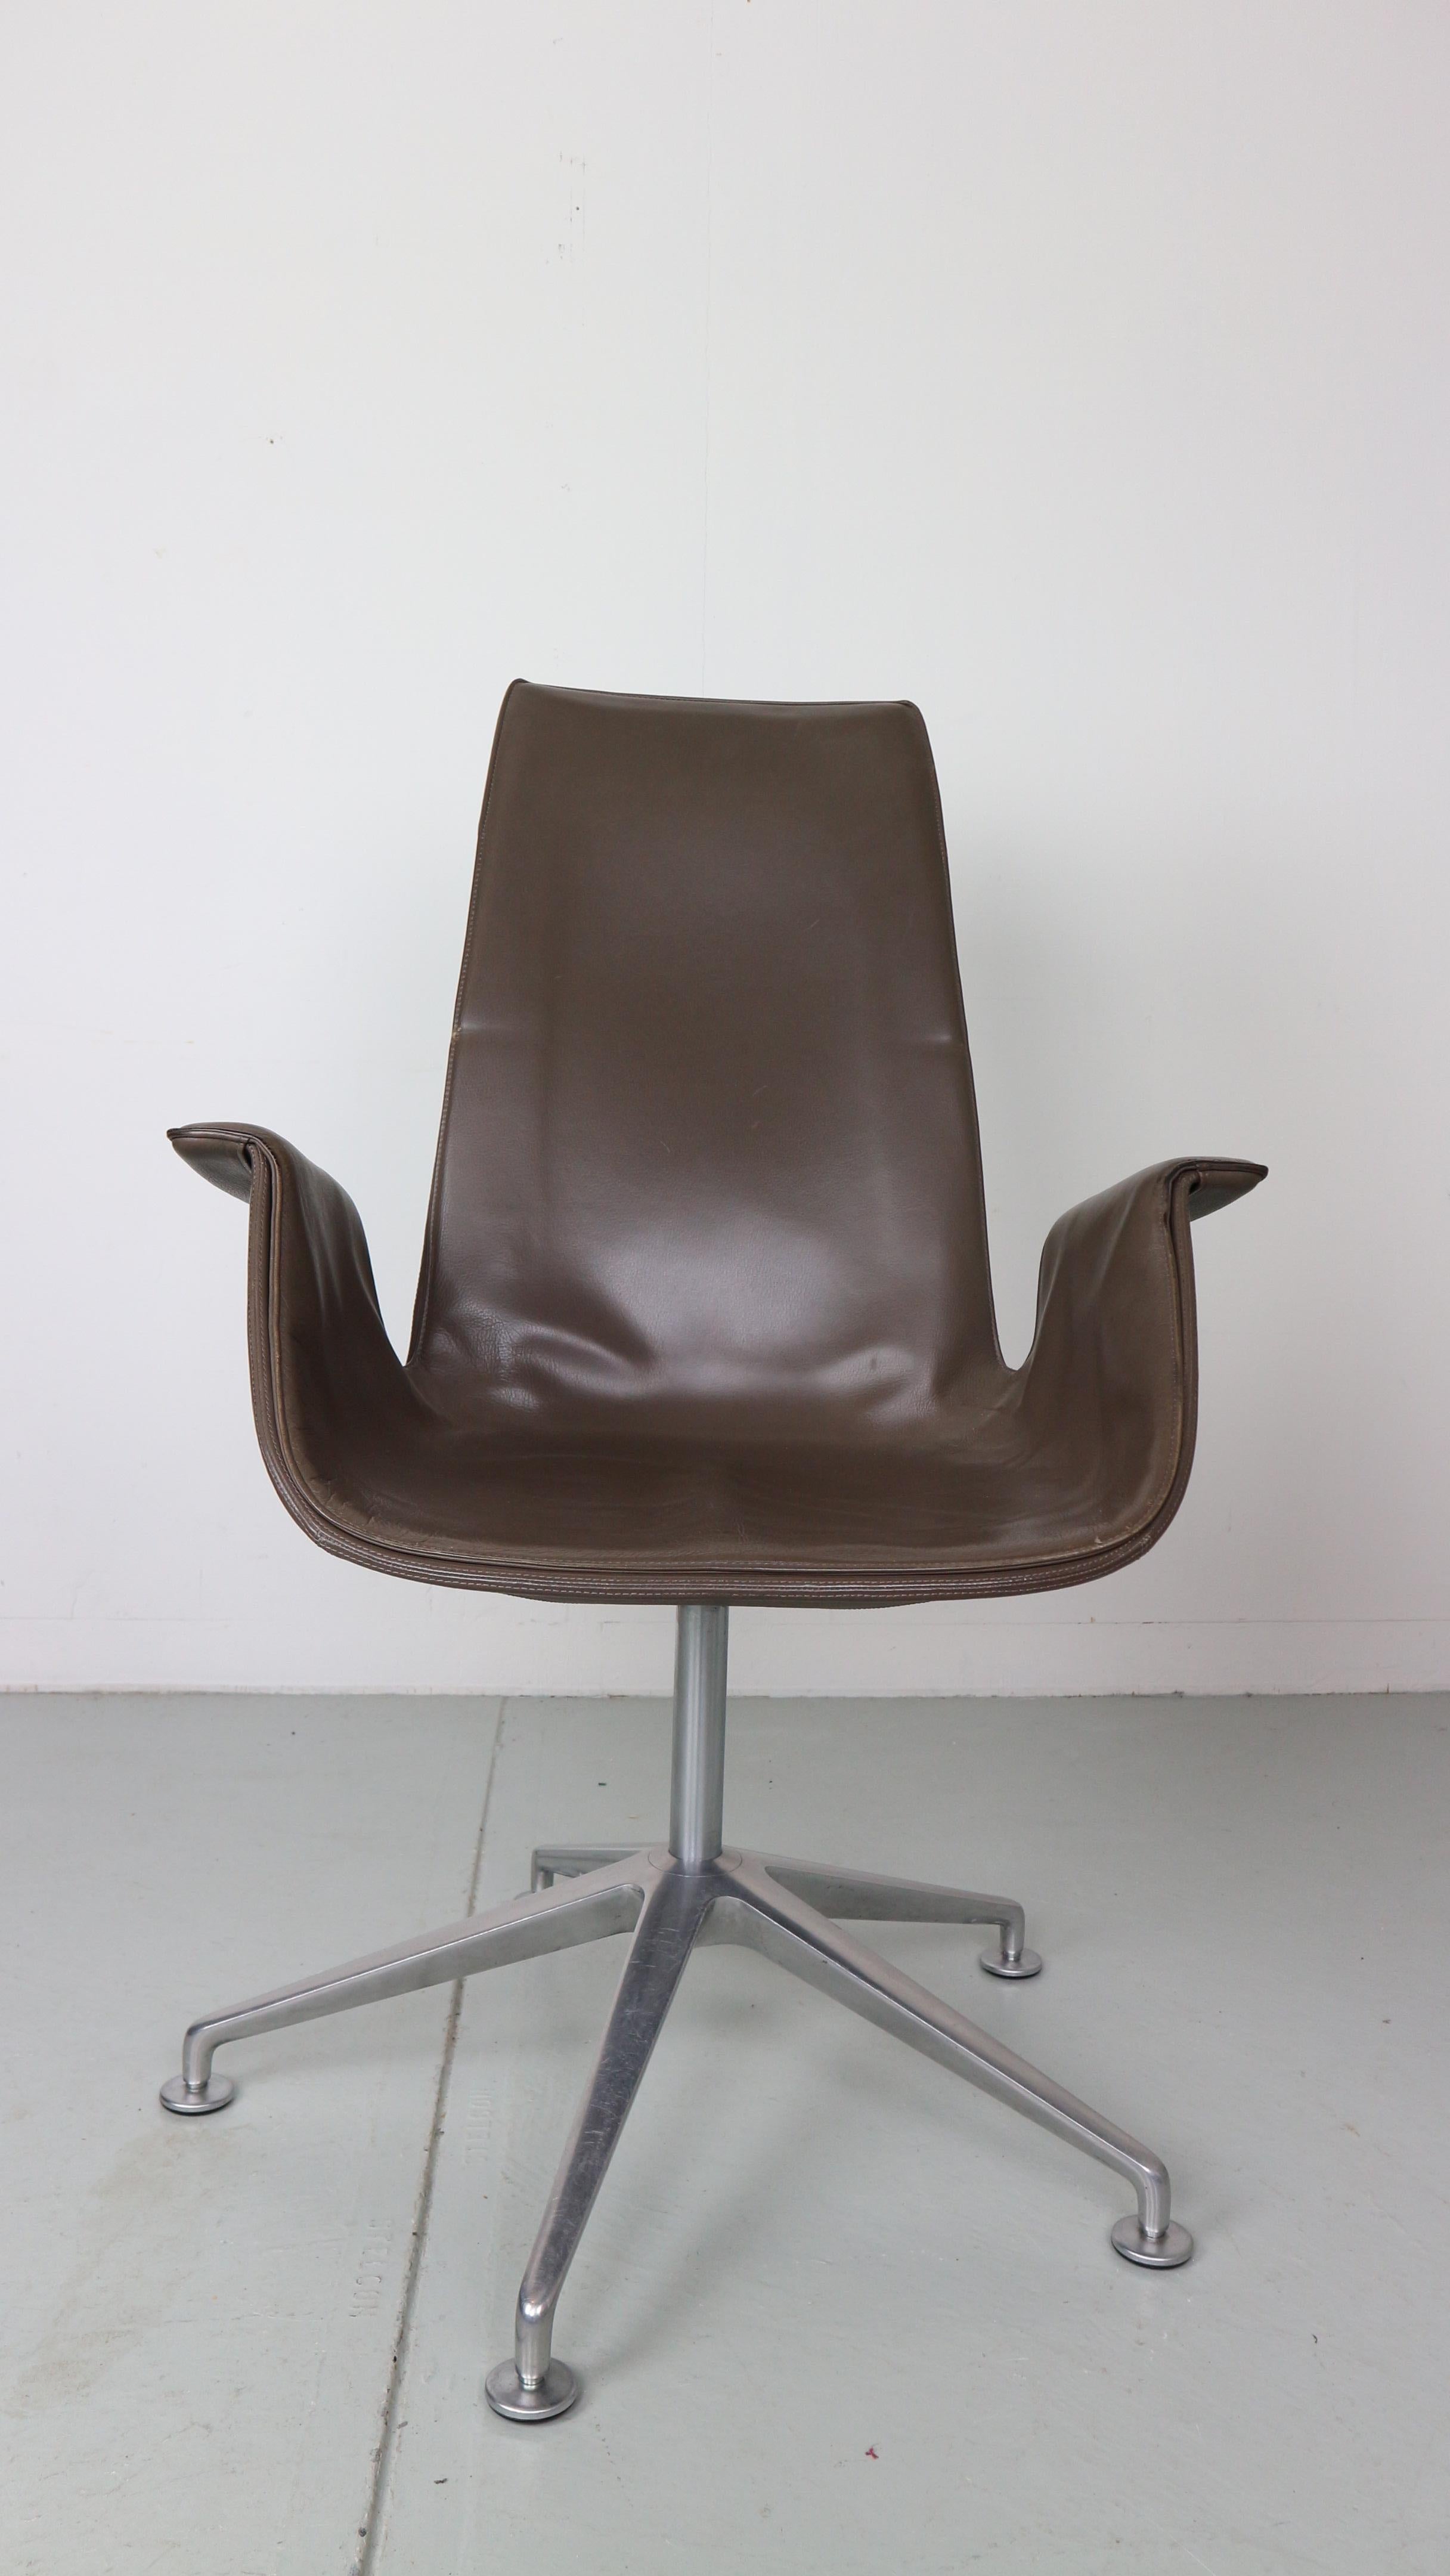 Armchair designed by Preben Fabricius & Jørgen Kastholm for Walter Knoll International manufacture in 1960s period Denmark.
Model no: FK6725 as well as mostly called 